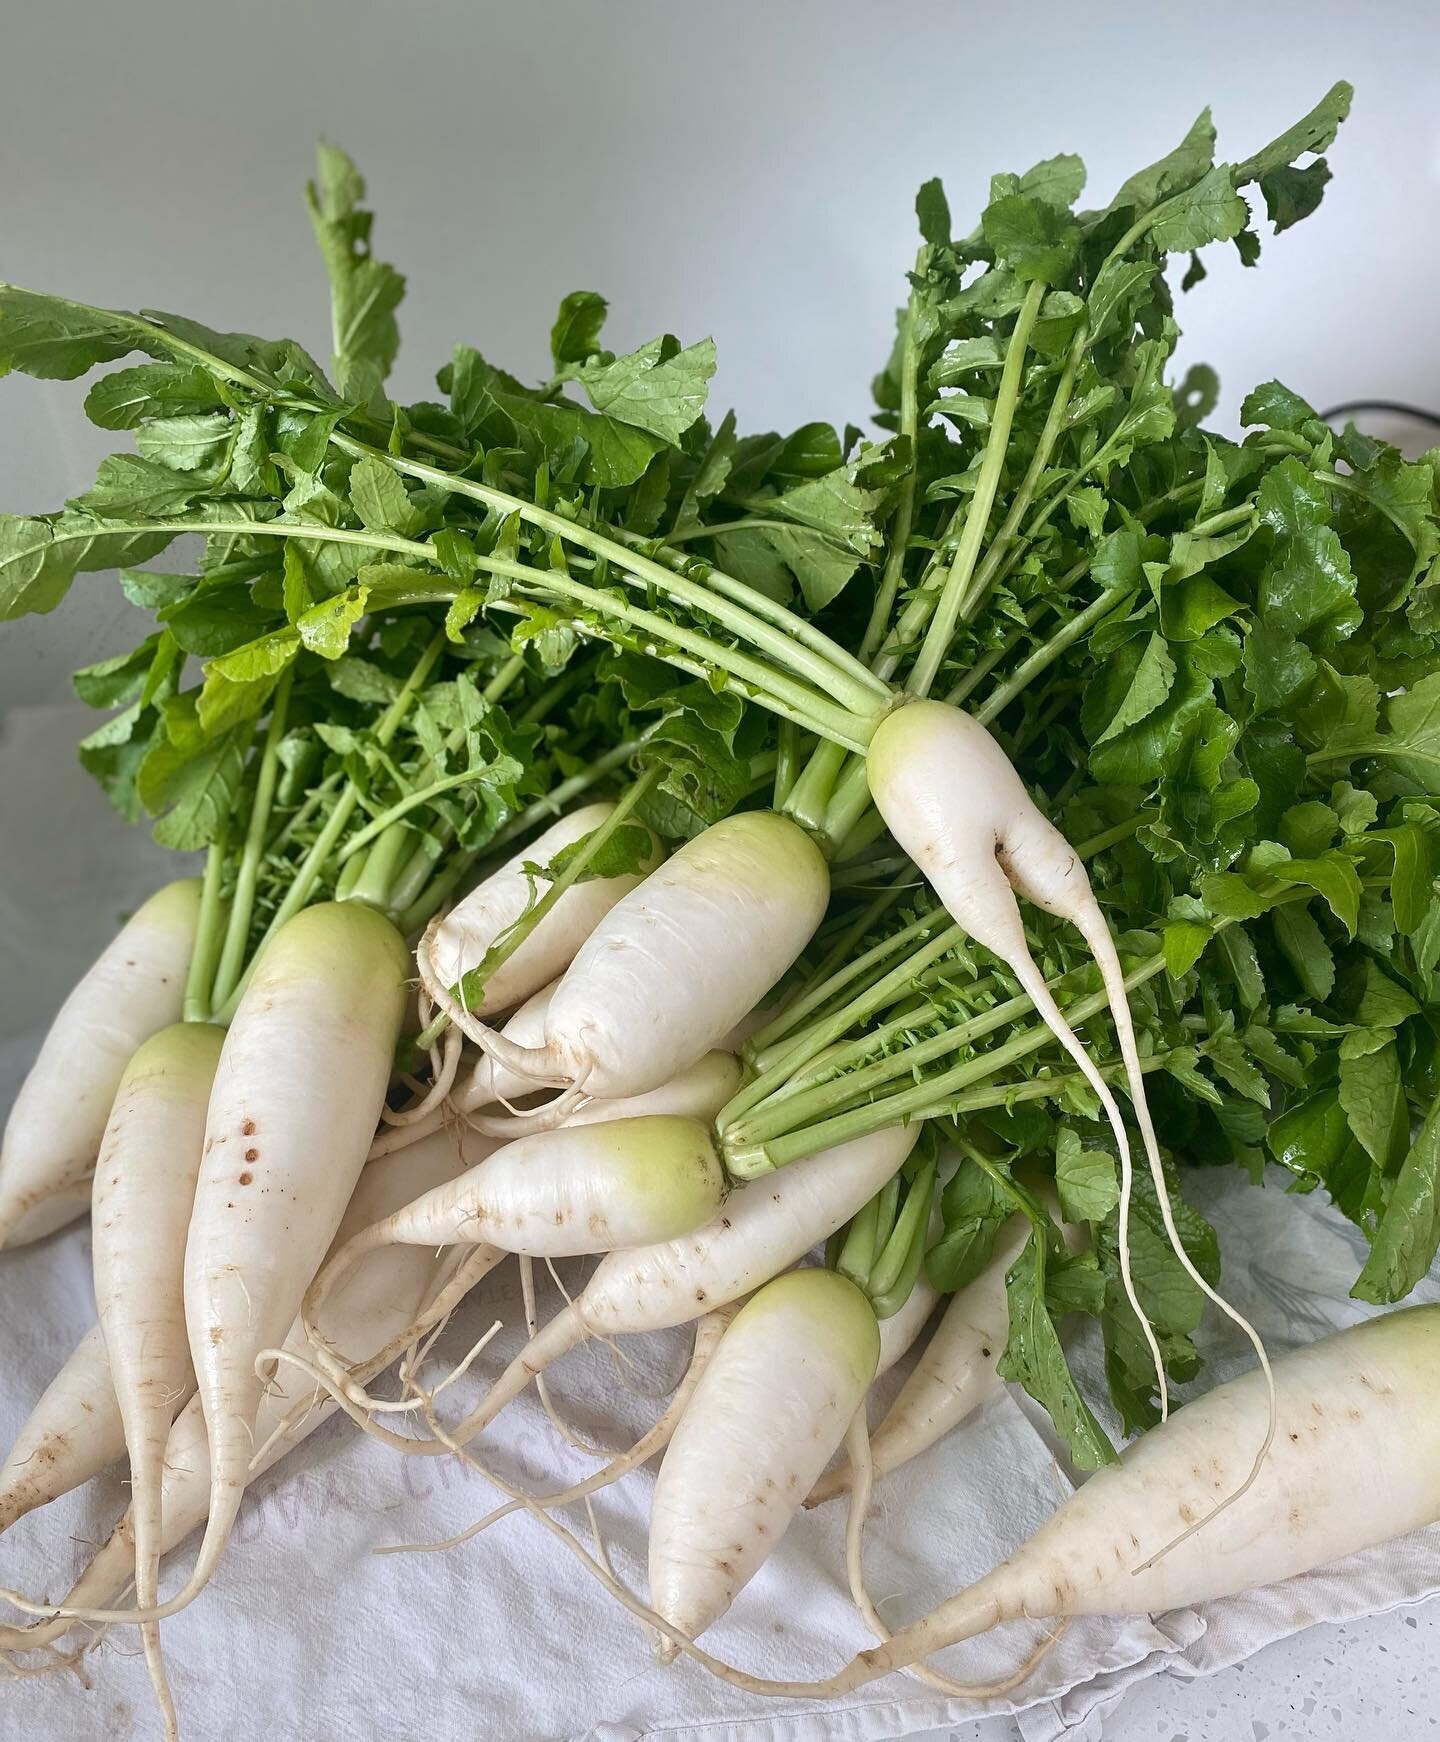 Kkakdugi is finally back in stock! 

Our kkakdugi is made with local daikons, naturally grown by Robin @namayasaifarm in Lewes. Since it&rsquo;s the very beginning of winter radish season, daikon radishes are quite small now but will grow bigger thro